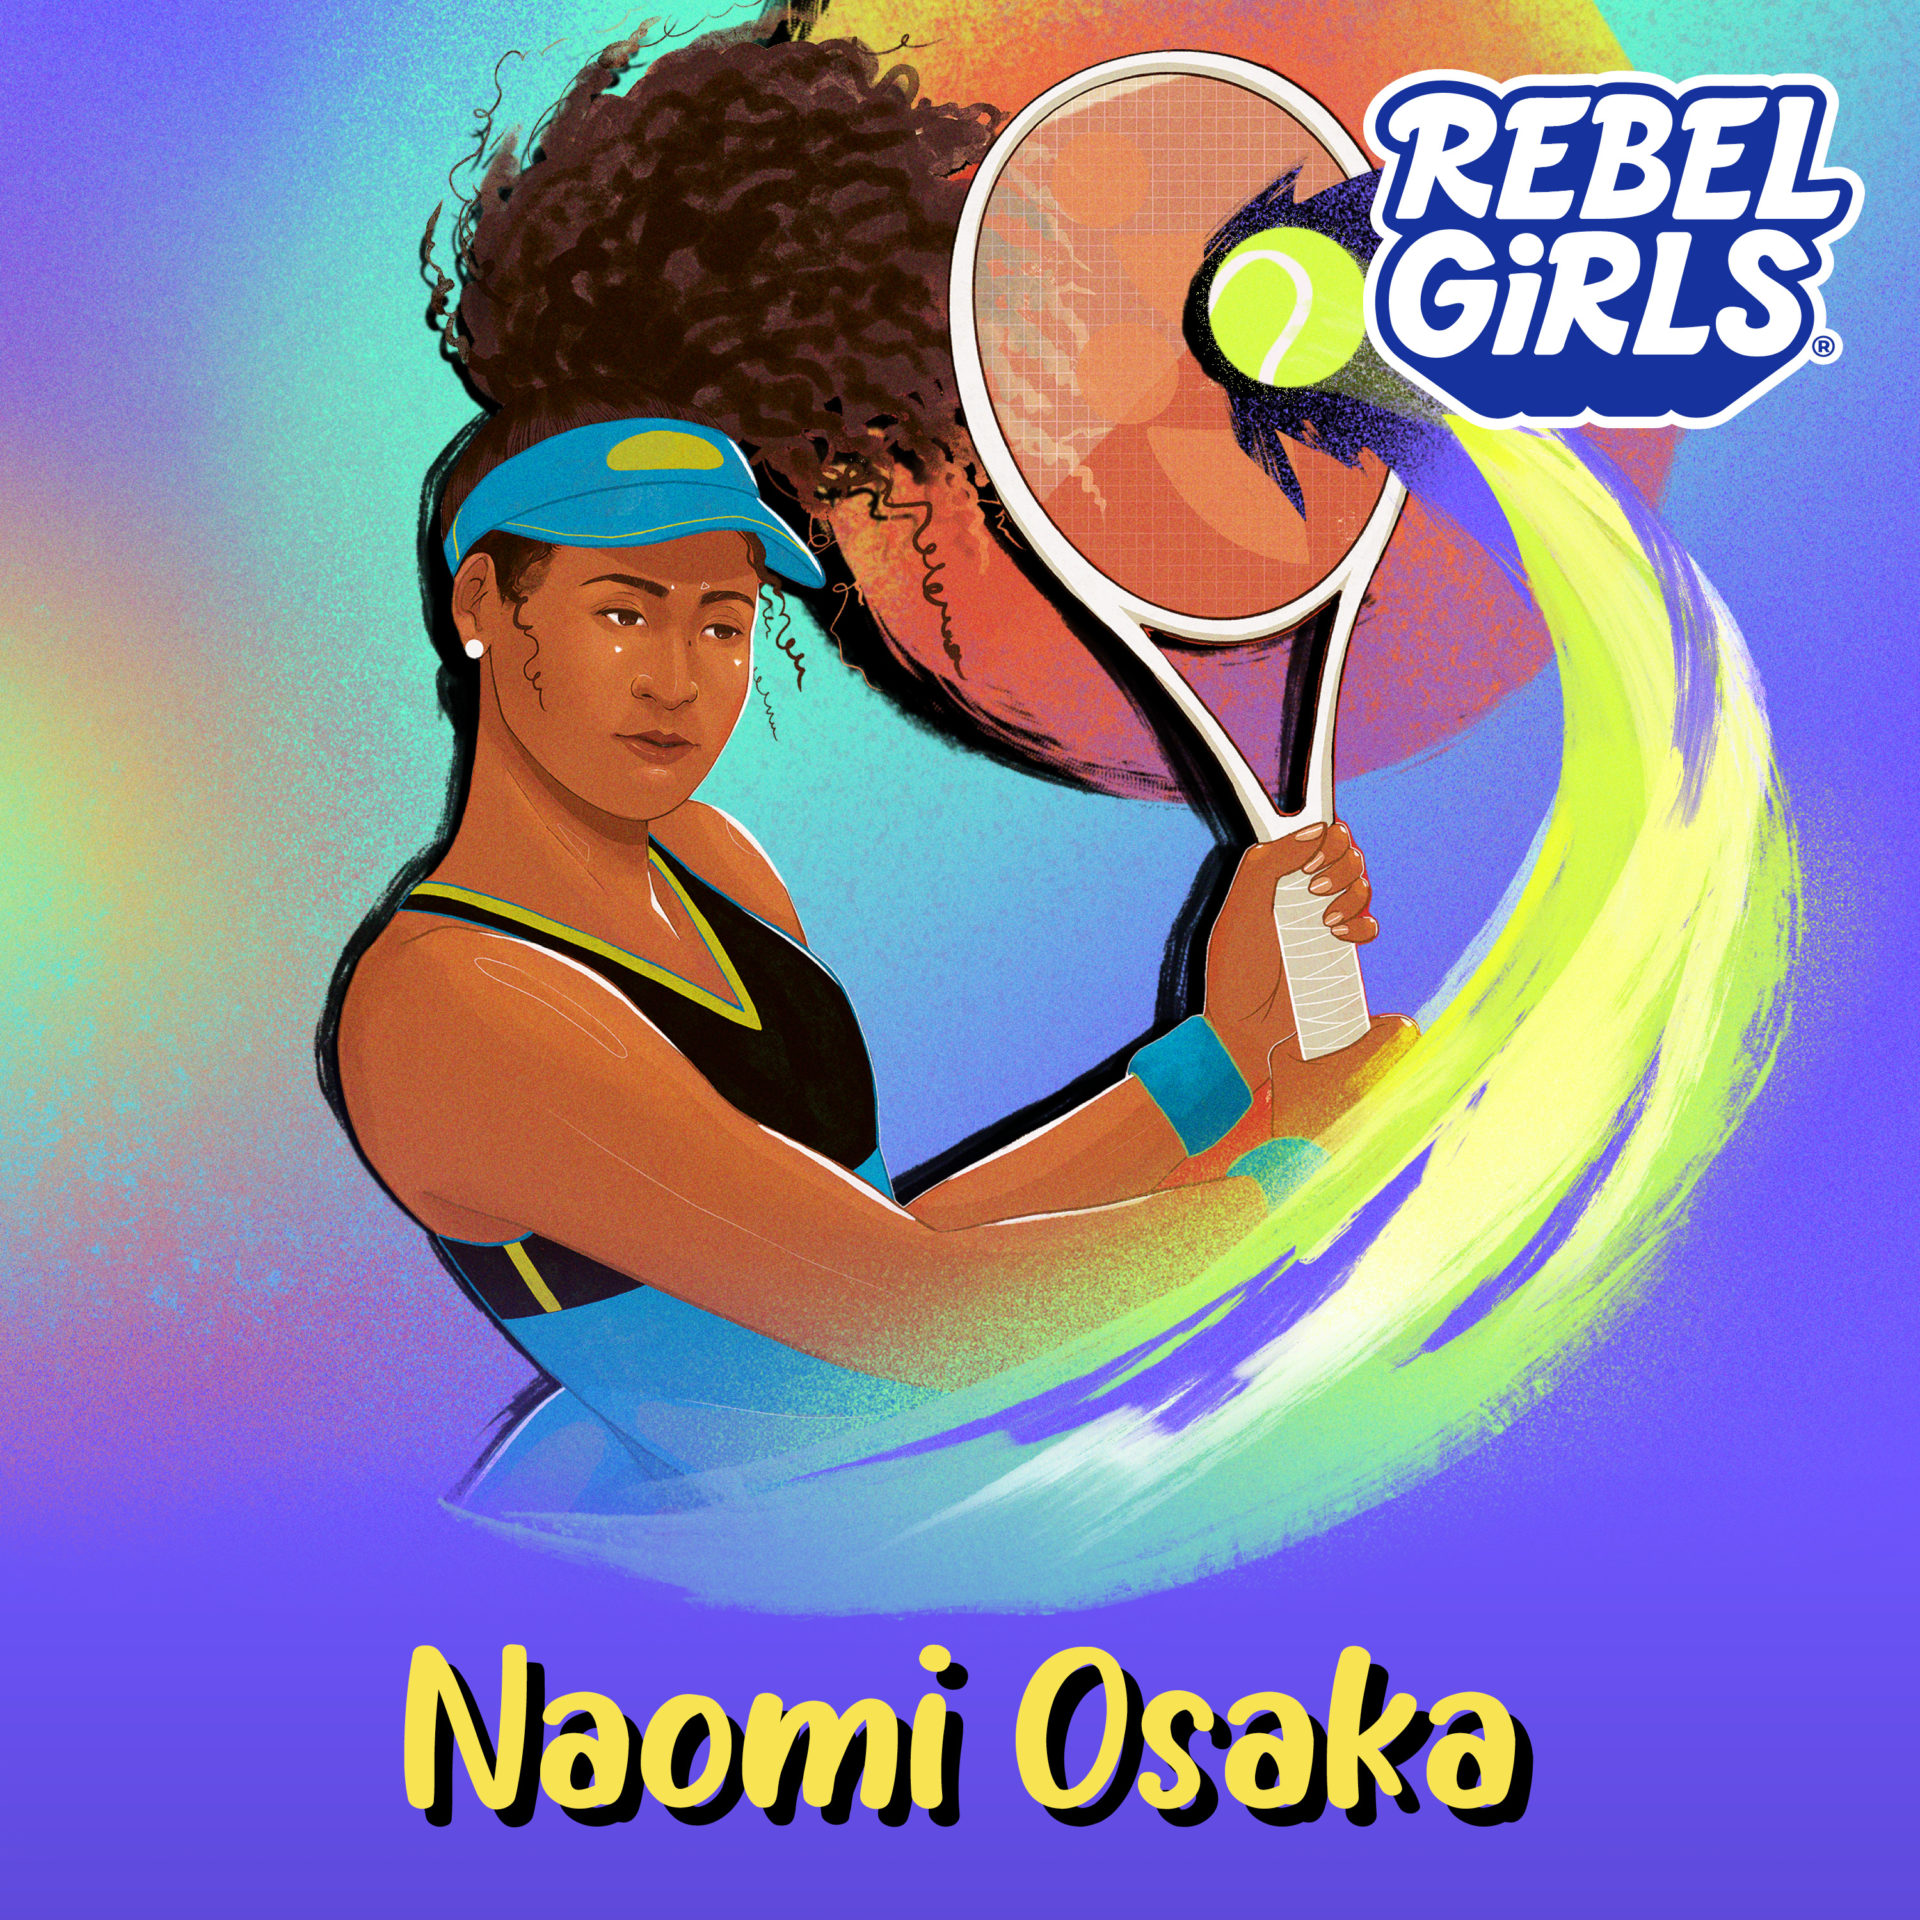 Naomi Osaka on Mental Health and Training to Face Her Idol at the